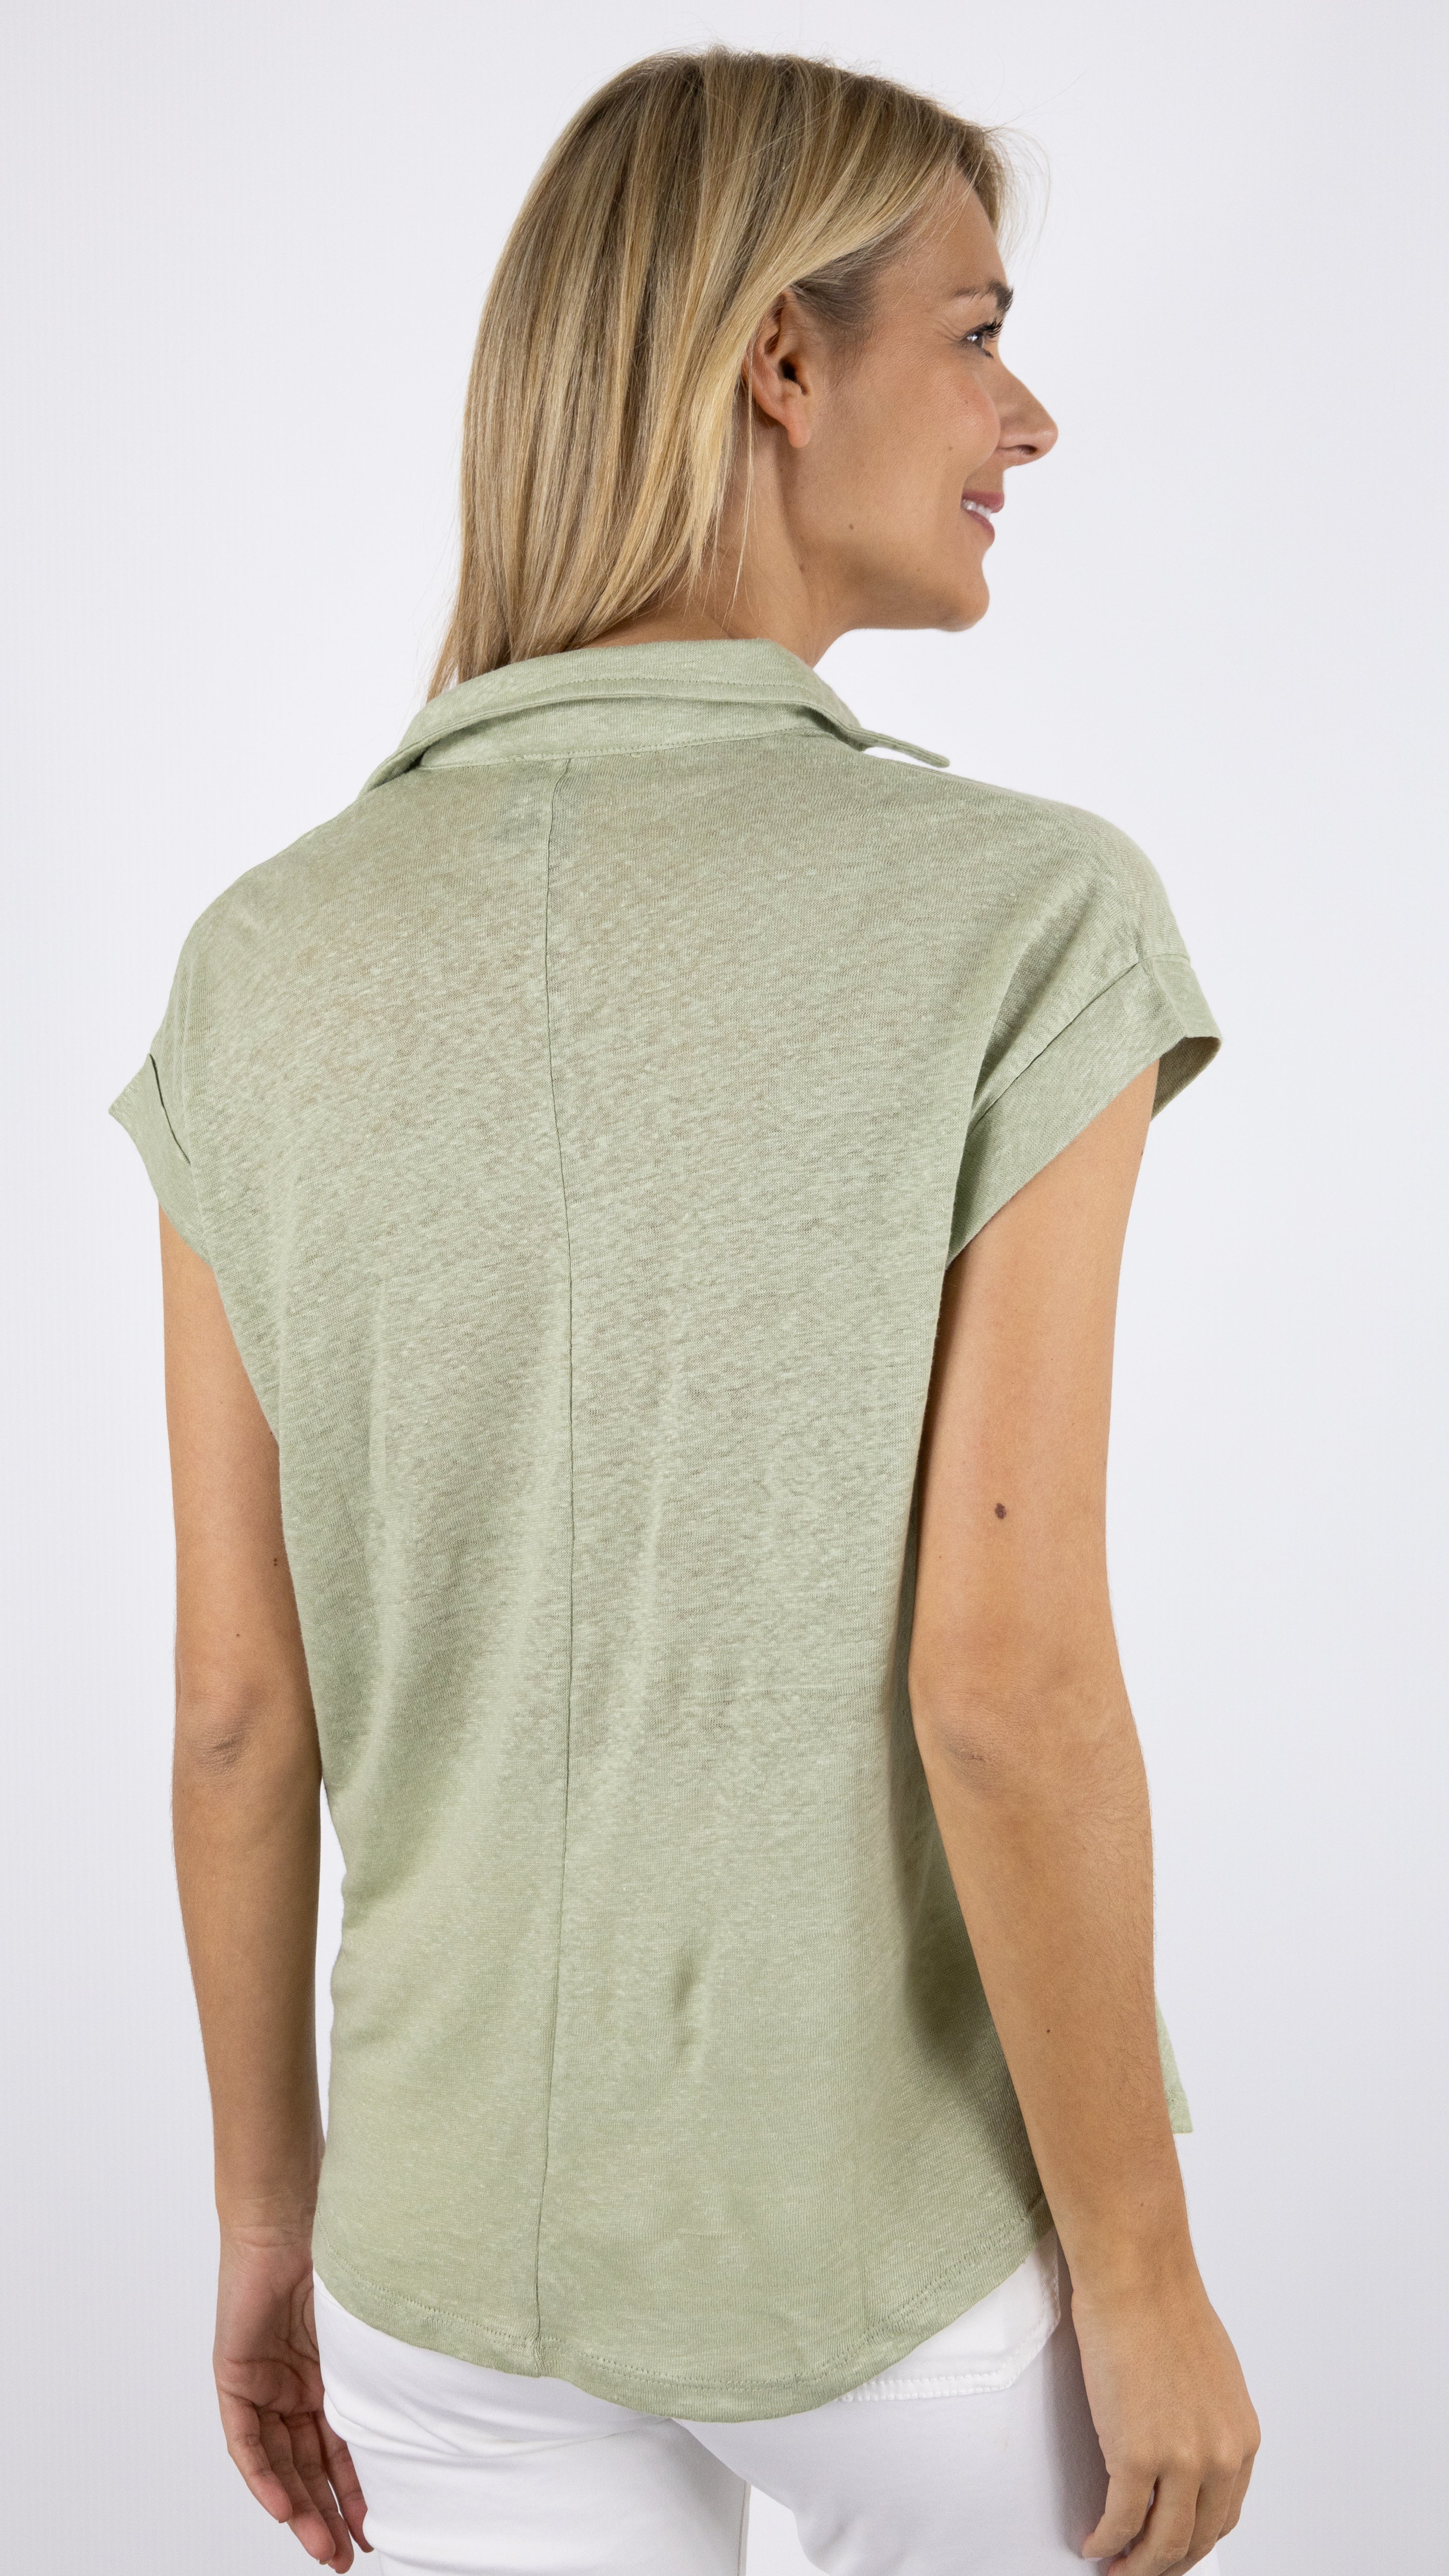 TEE SHIRT COL POLO EN LIN VALENTINA NOT SHY OLIVE#color_olive